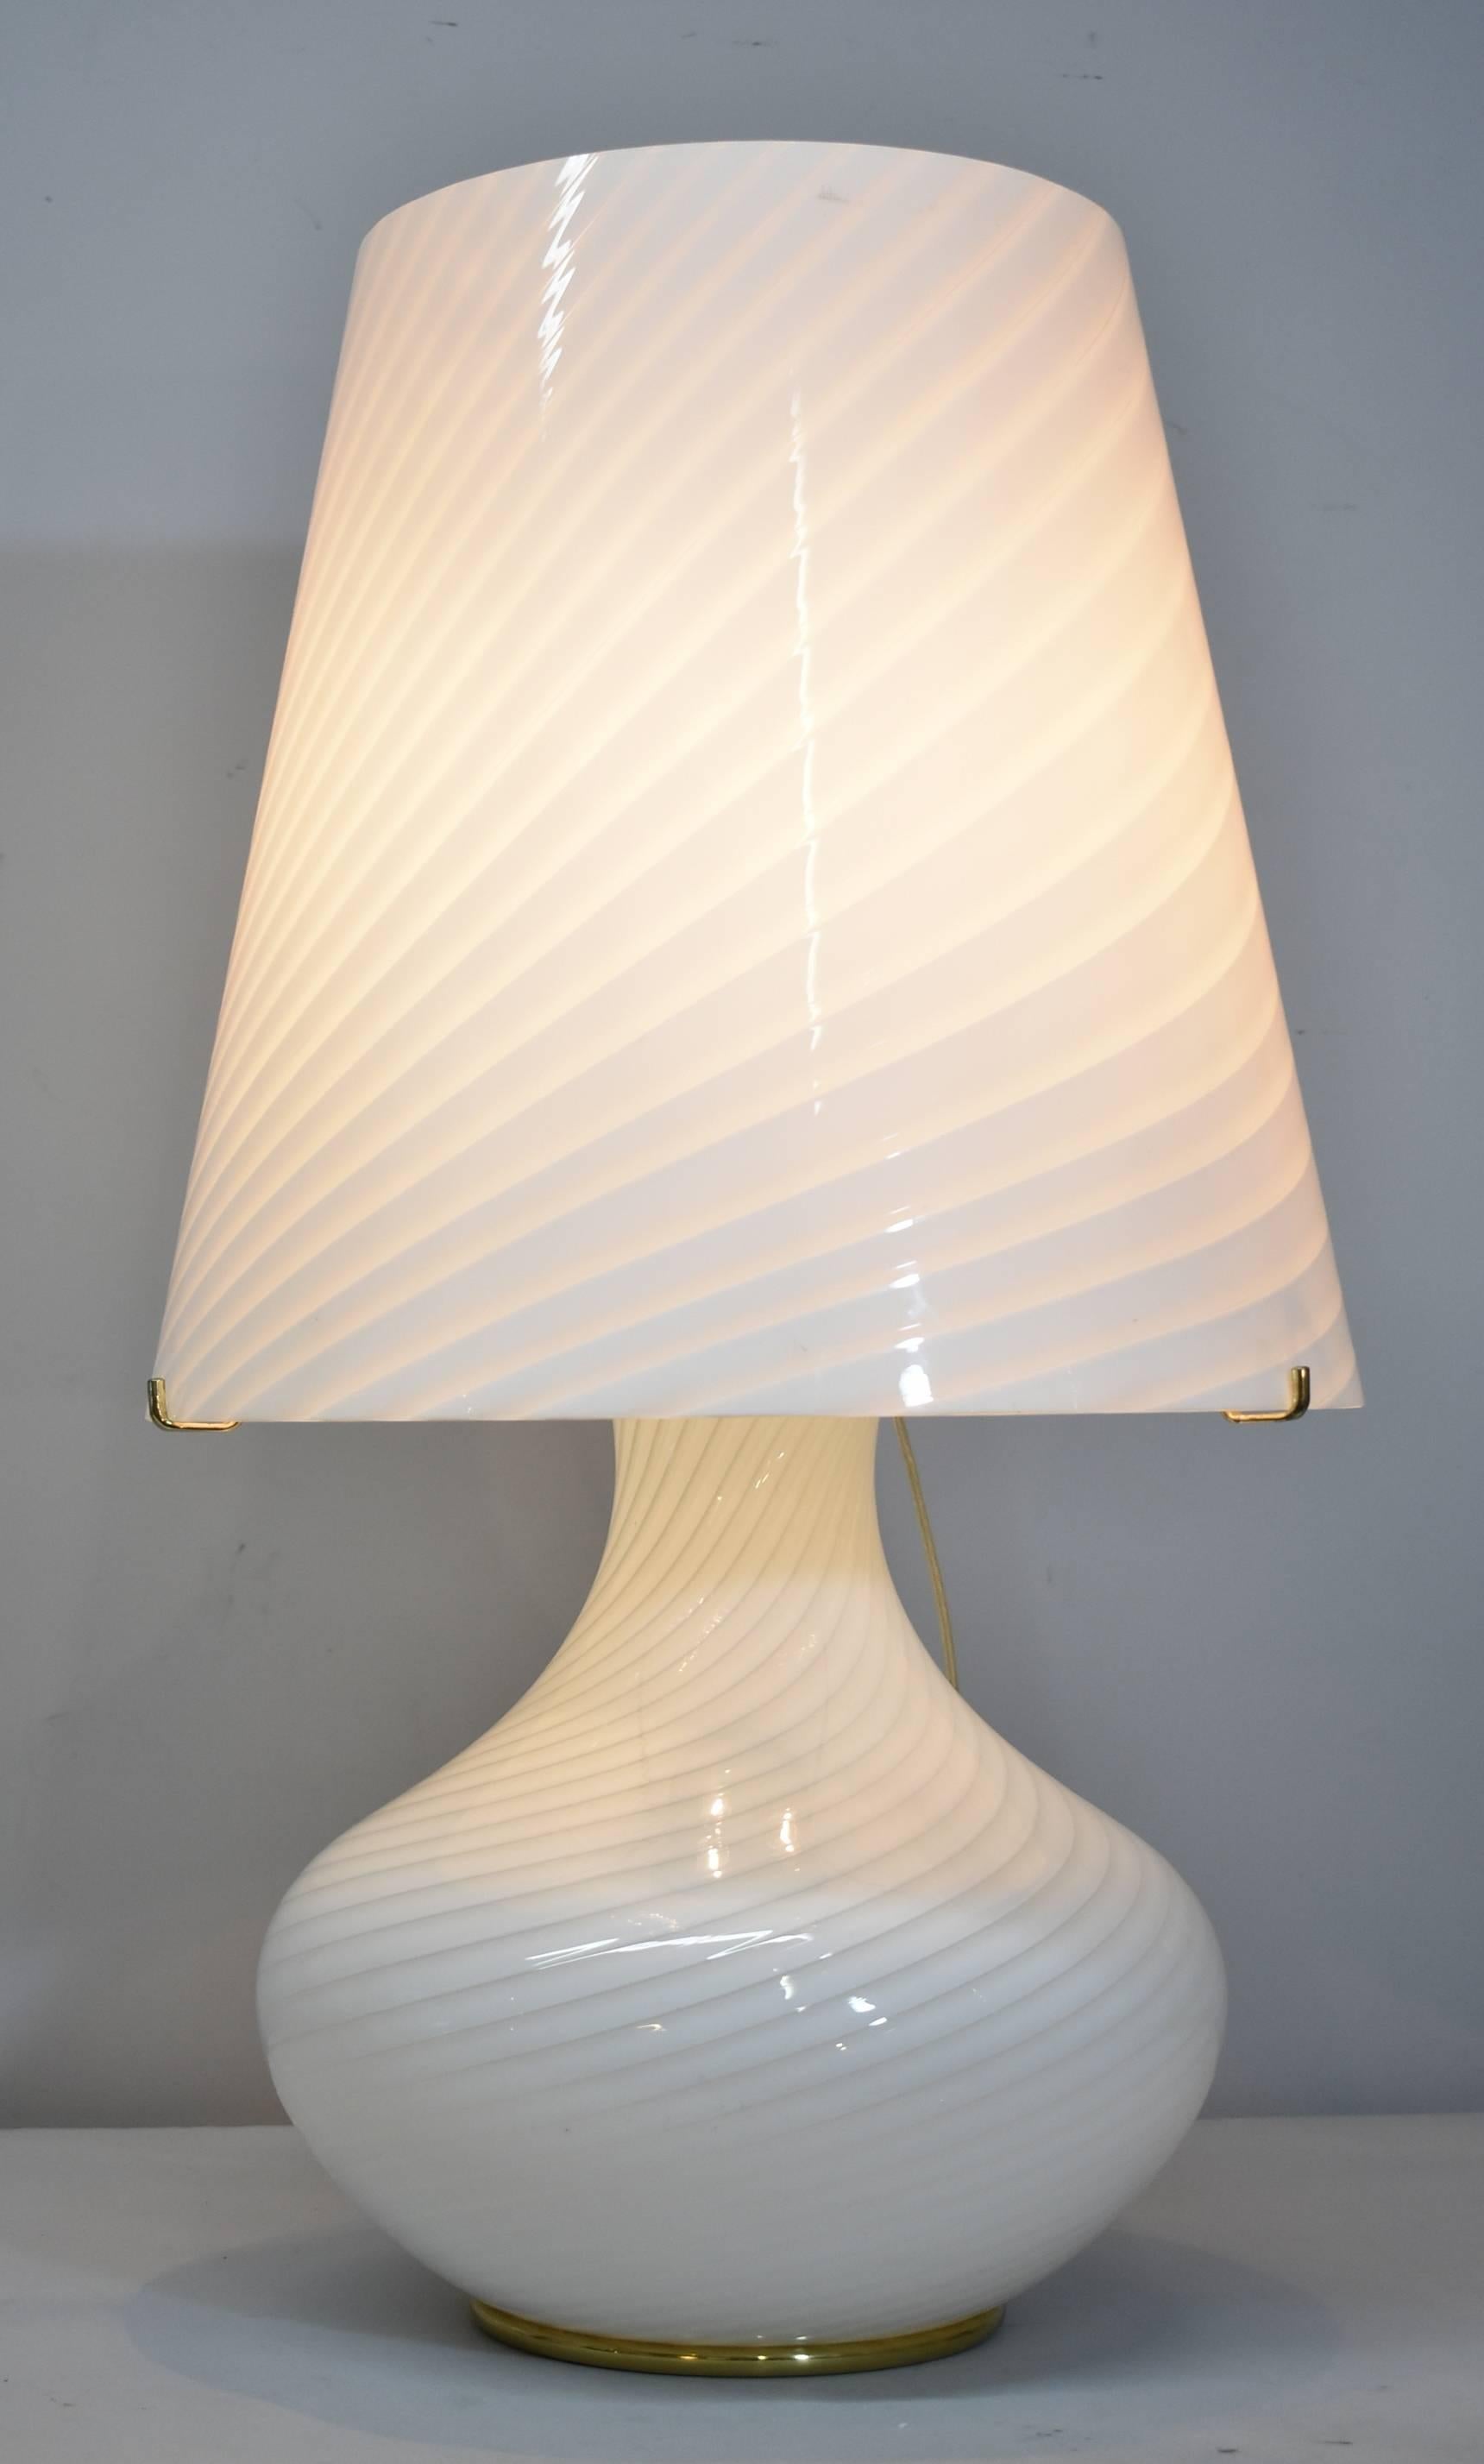 Unusually large Venetian glass table lamp by Vetri Murano. Murano glass is done in an unique swirled pattern. Lamp has brass fittings with three cluster socket. Switch has multi-level settings. Dimensions are 29